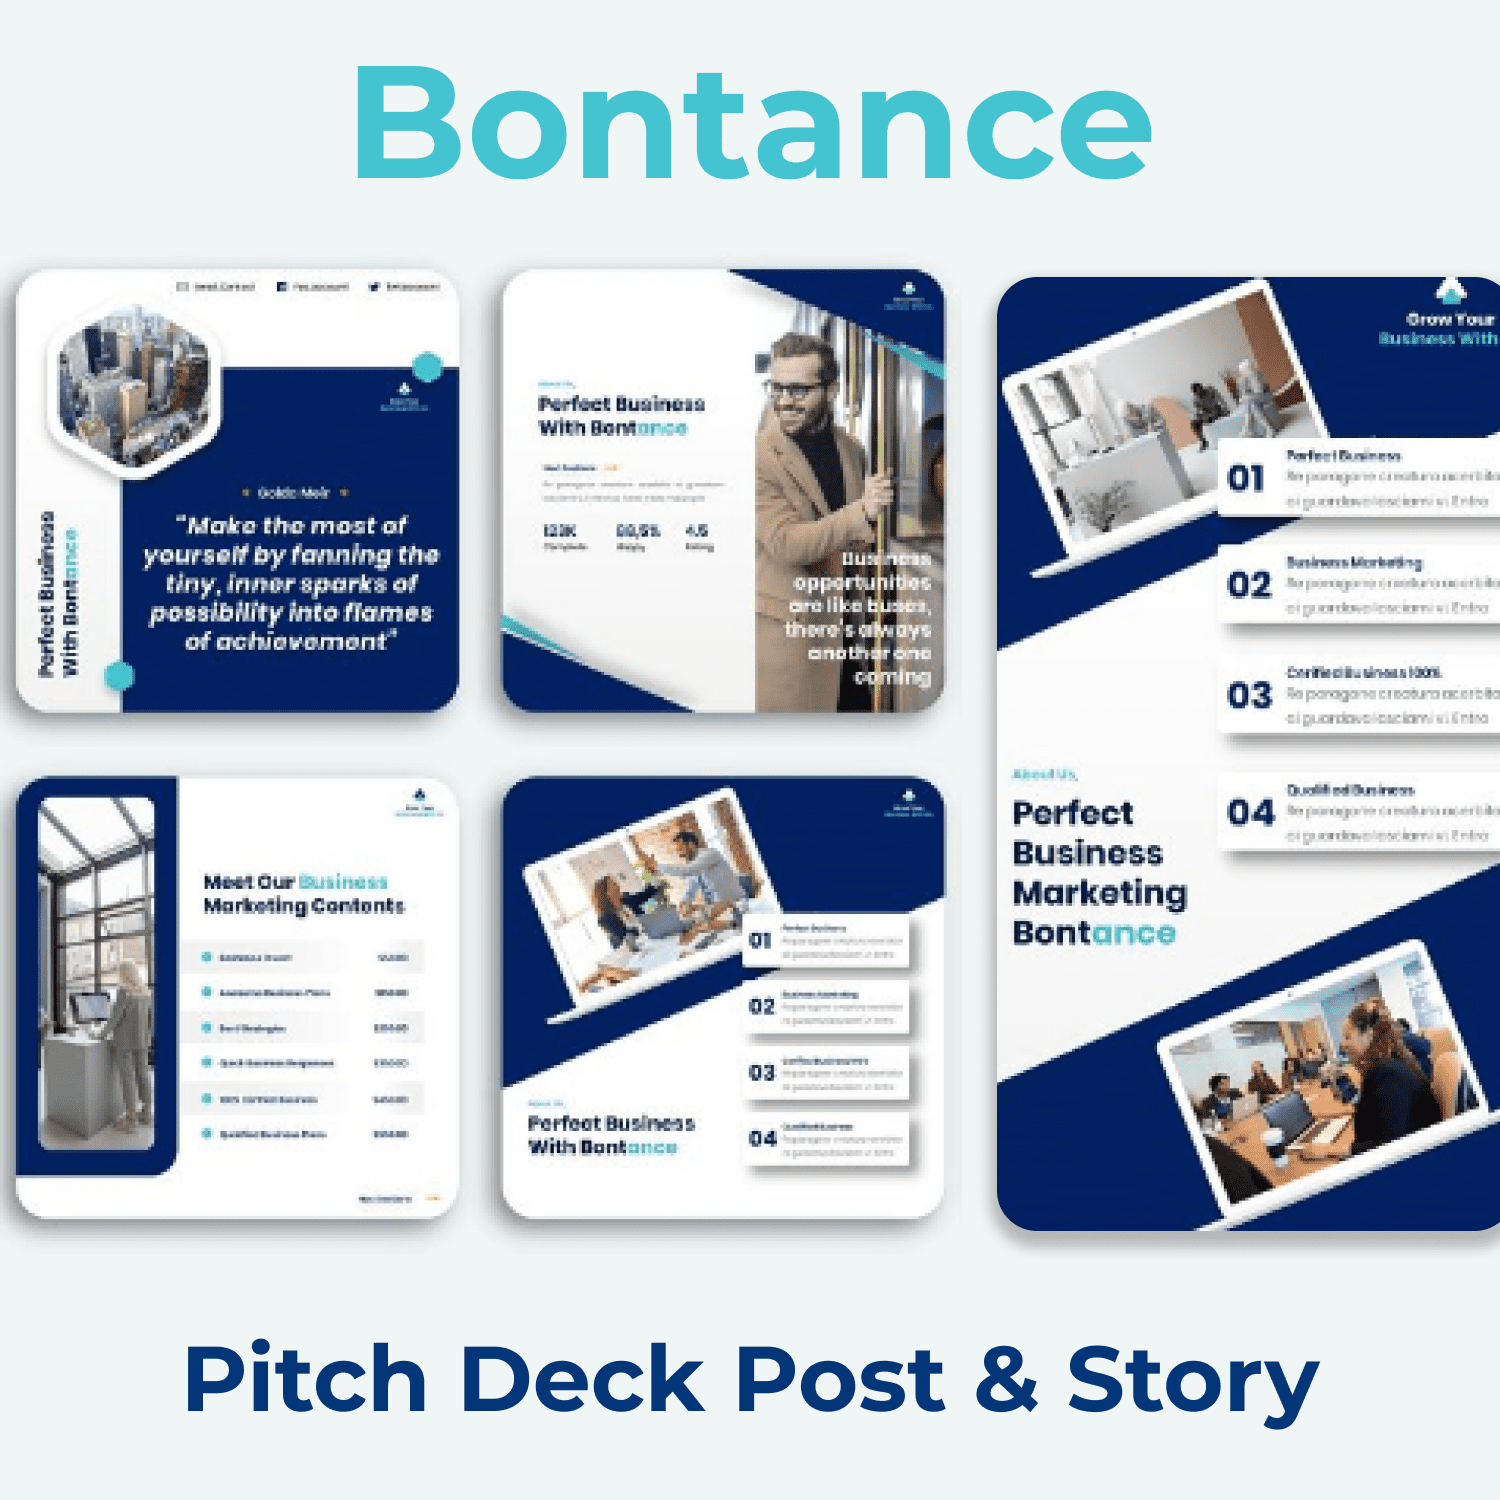 Bontance - Pitch Deck Post & Story main cover.